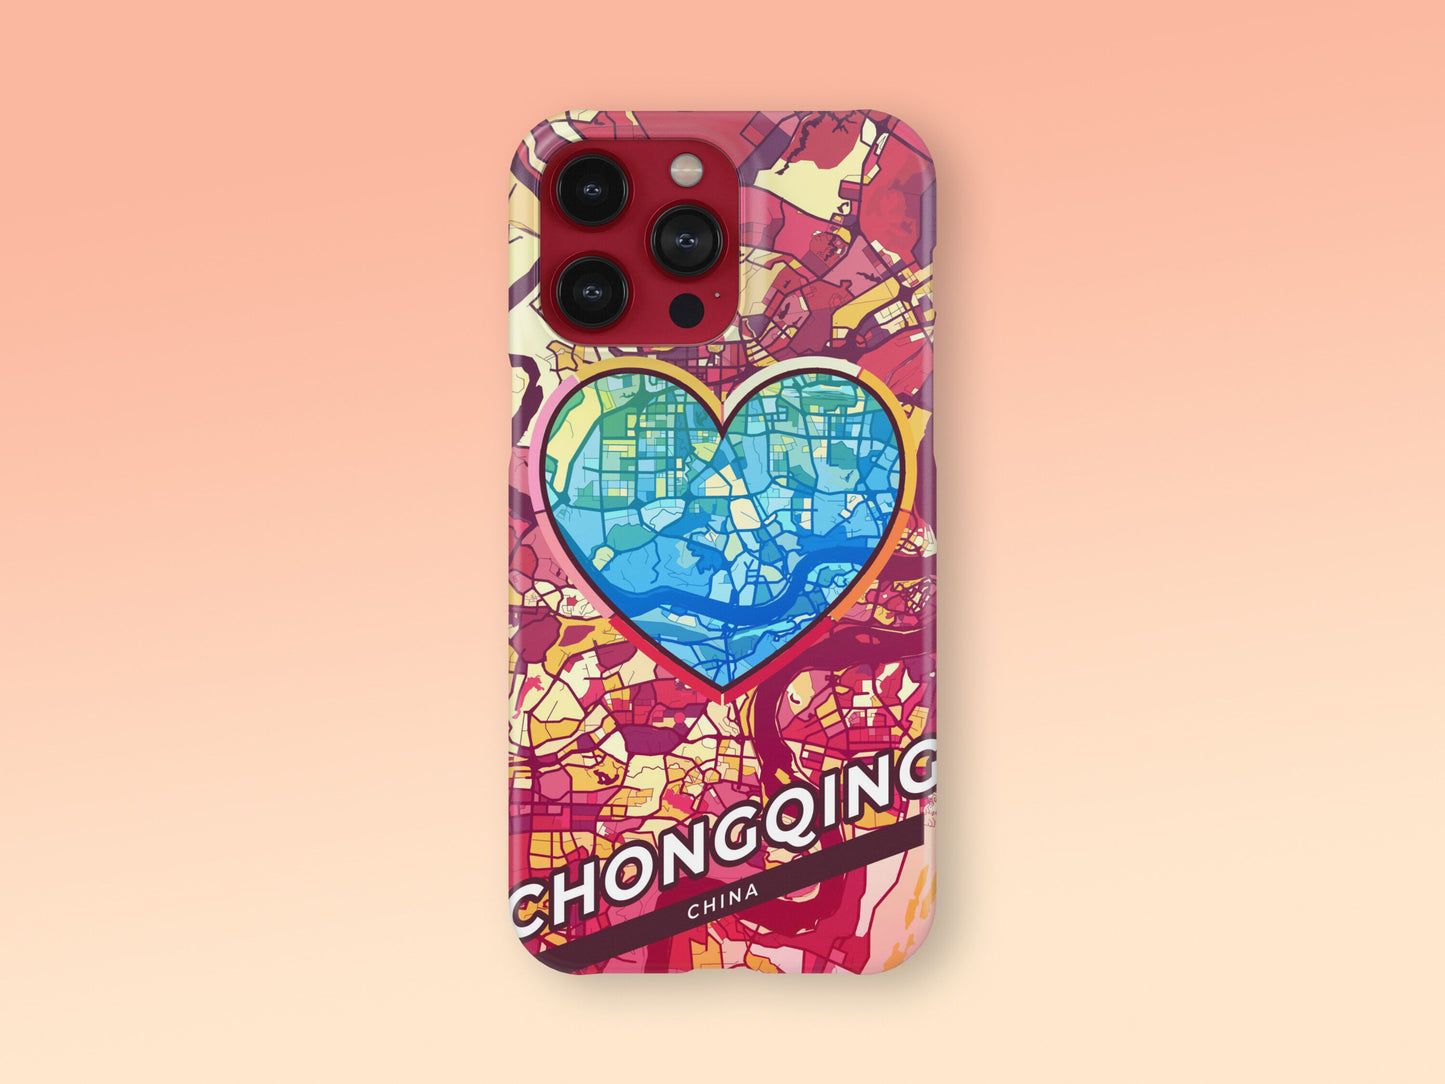 Chongqing China slim phone case with colorful icon. Birthday, wedding or housewarming gift. Couple match cases. 2